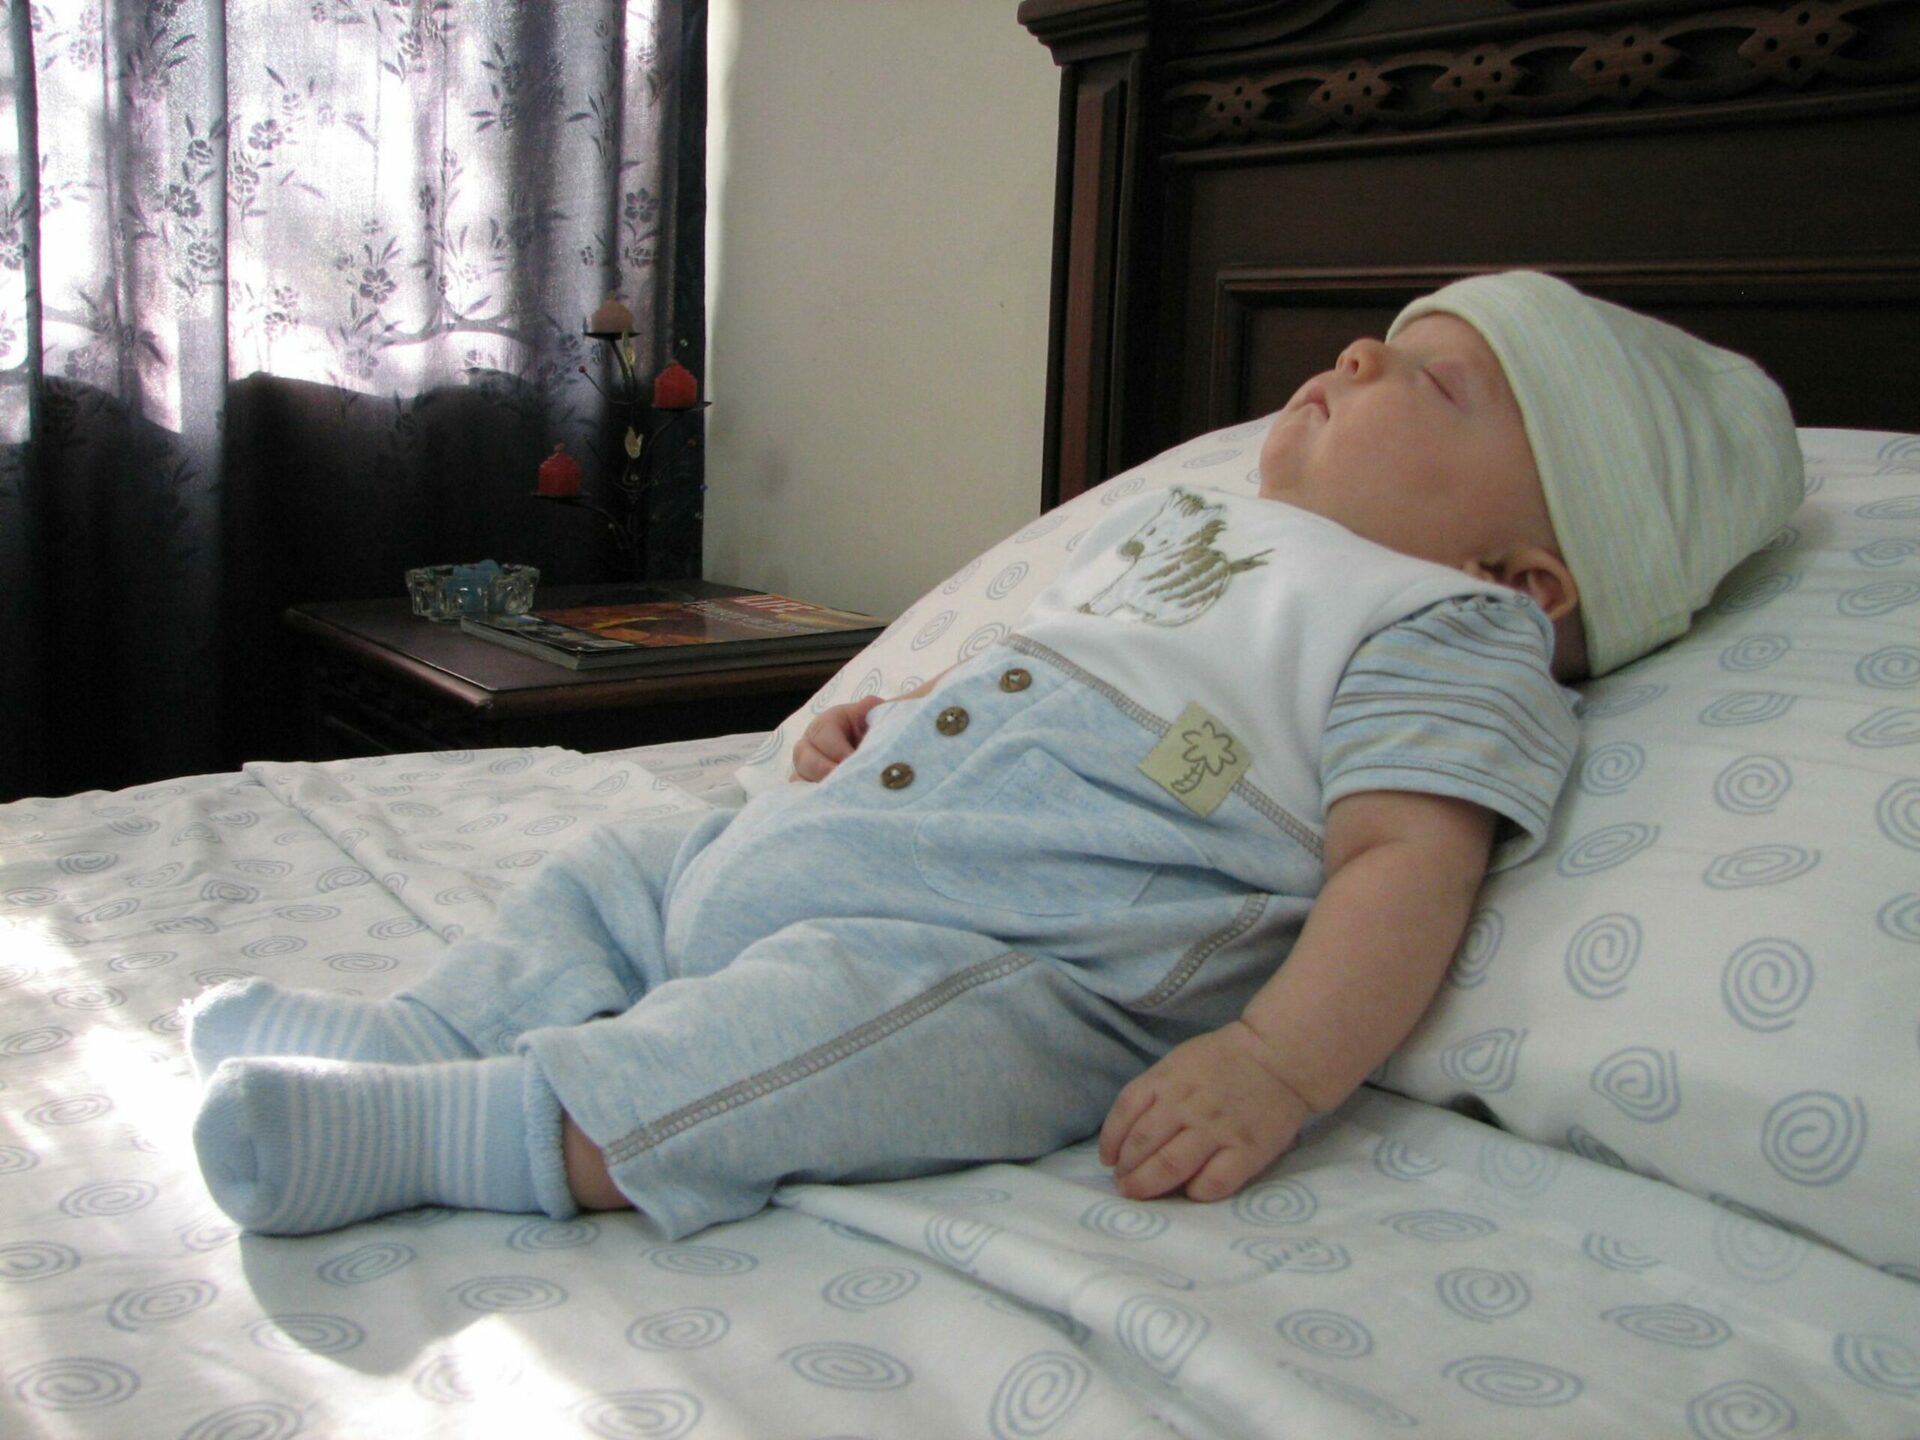 Can Baby Sleep In Swing When Congested